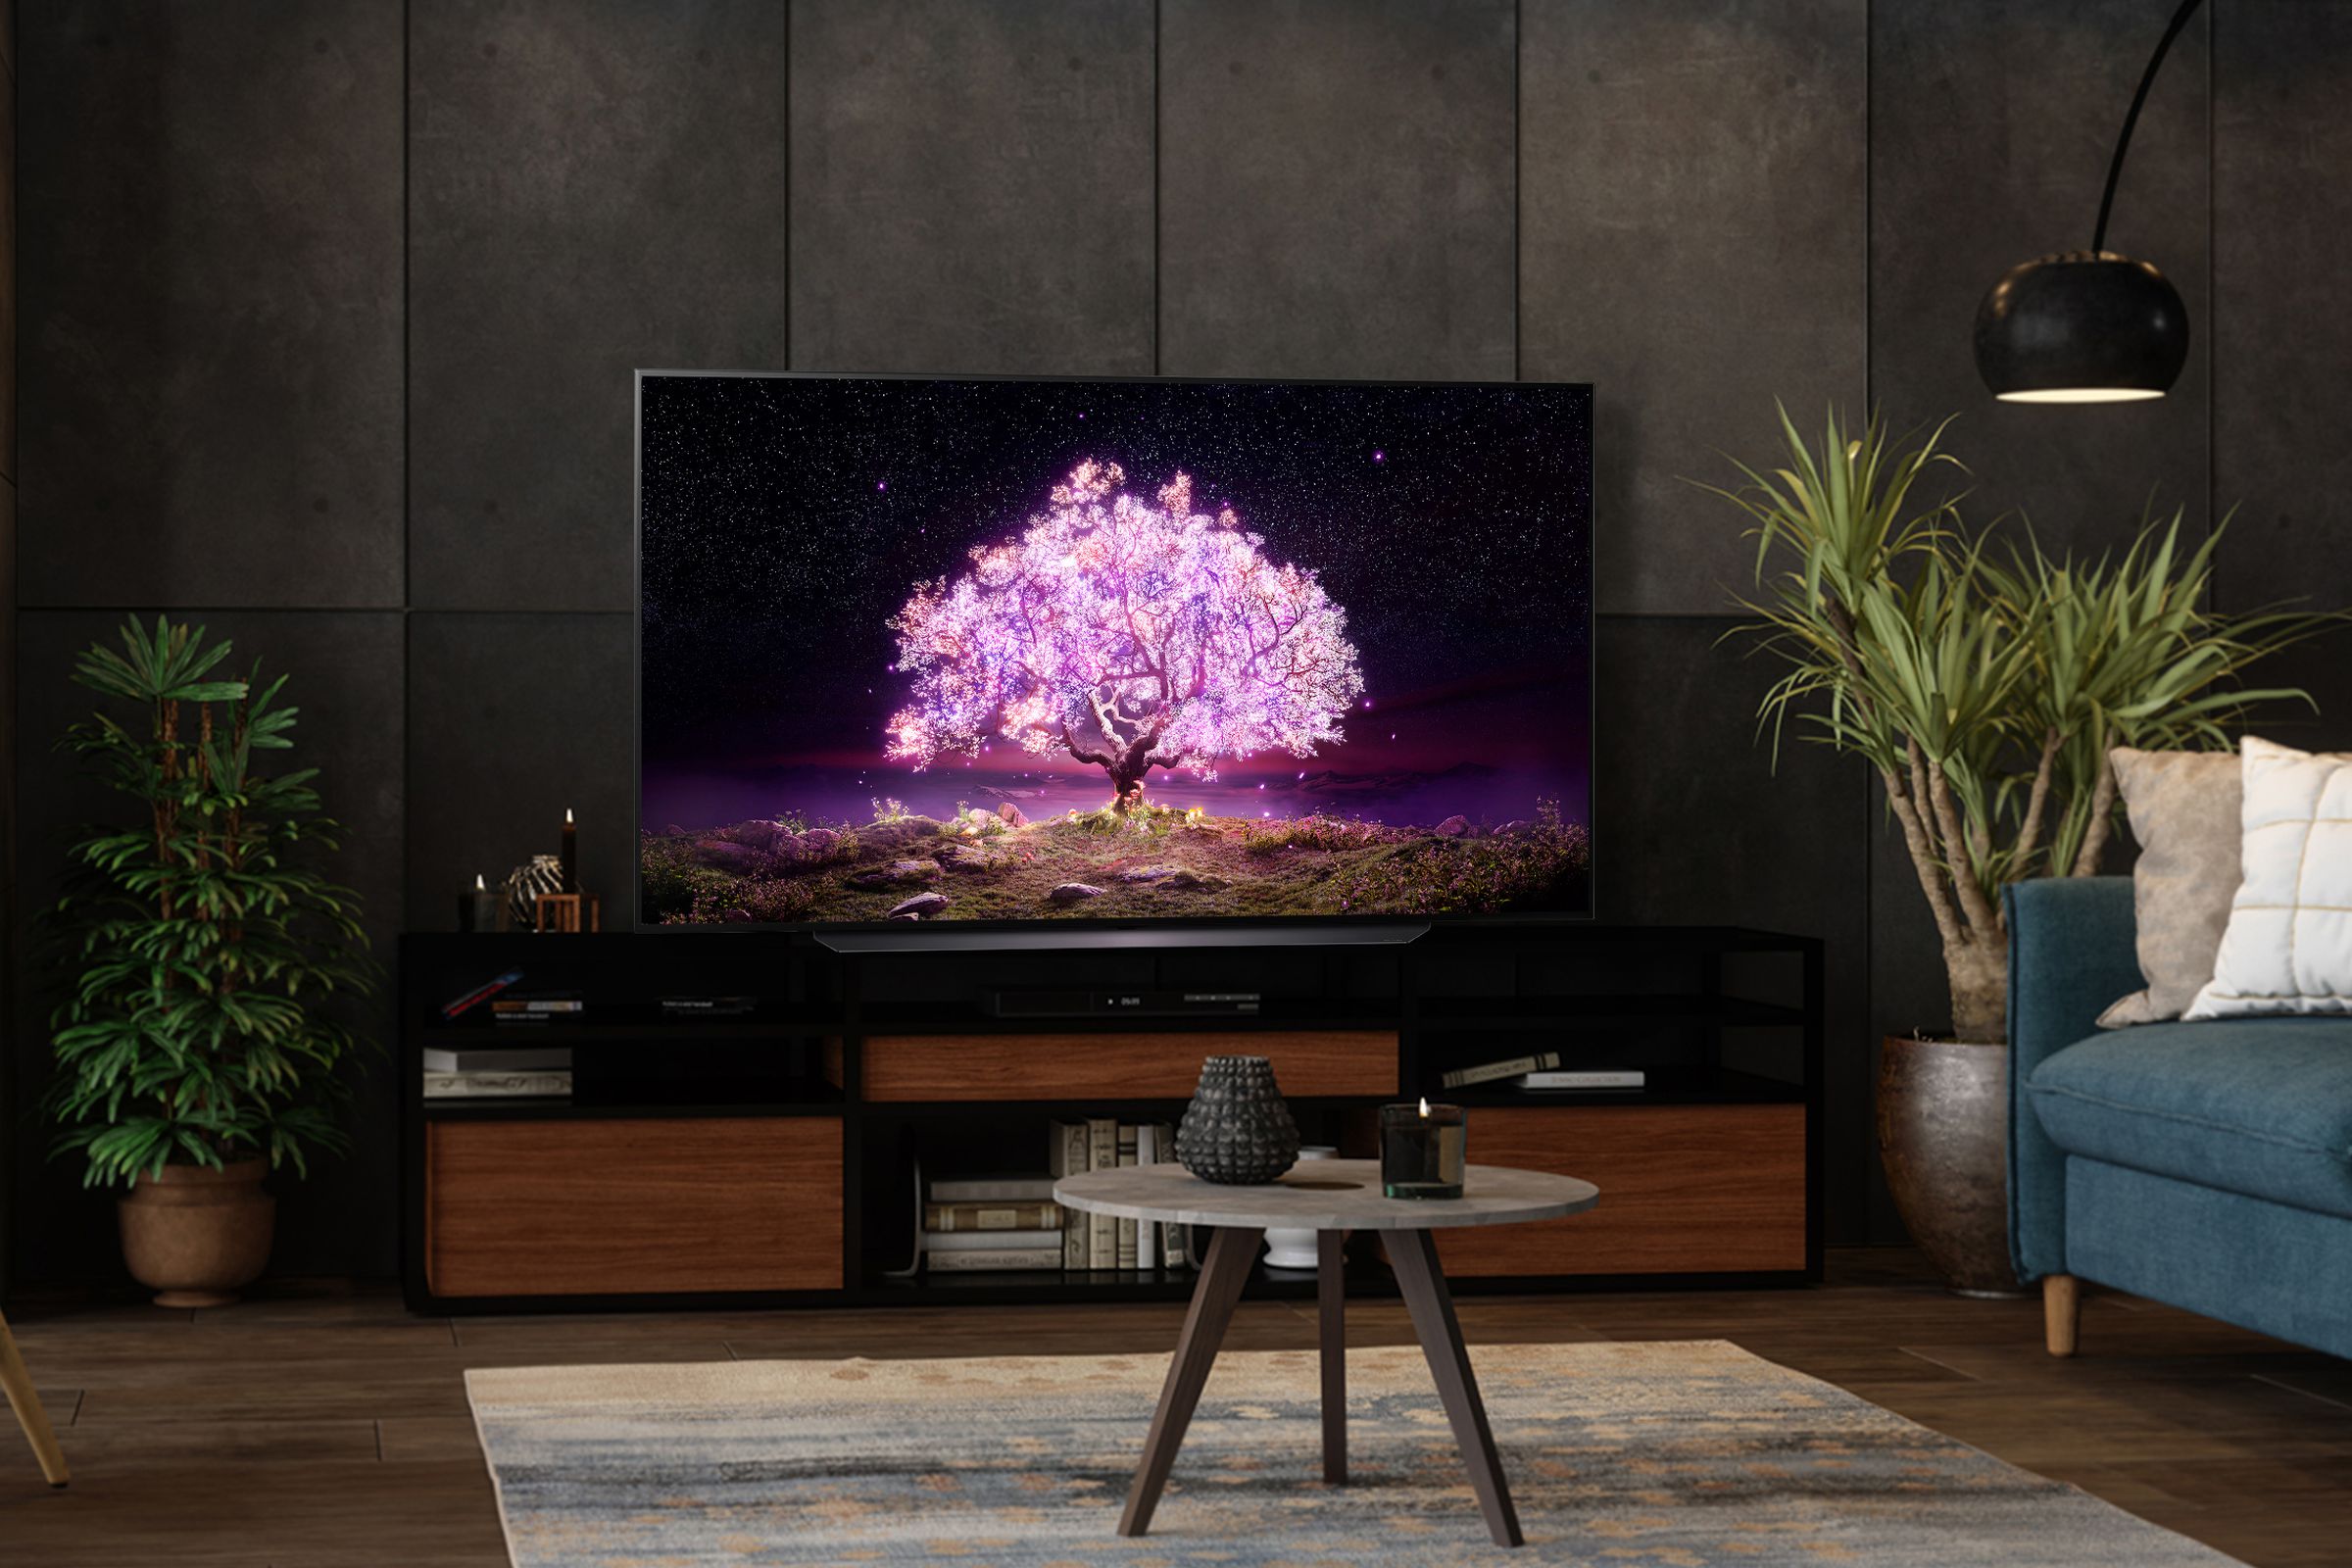 The LG C1 OLED TV supports HDMI 2.1 and 120Hz Variable Refresh Rate for use with modern consoles.